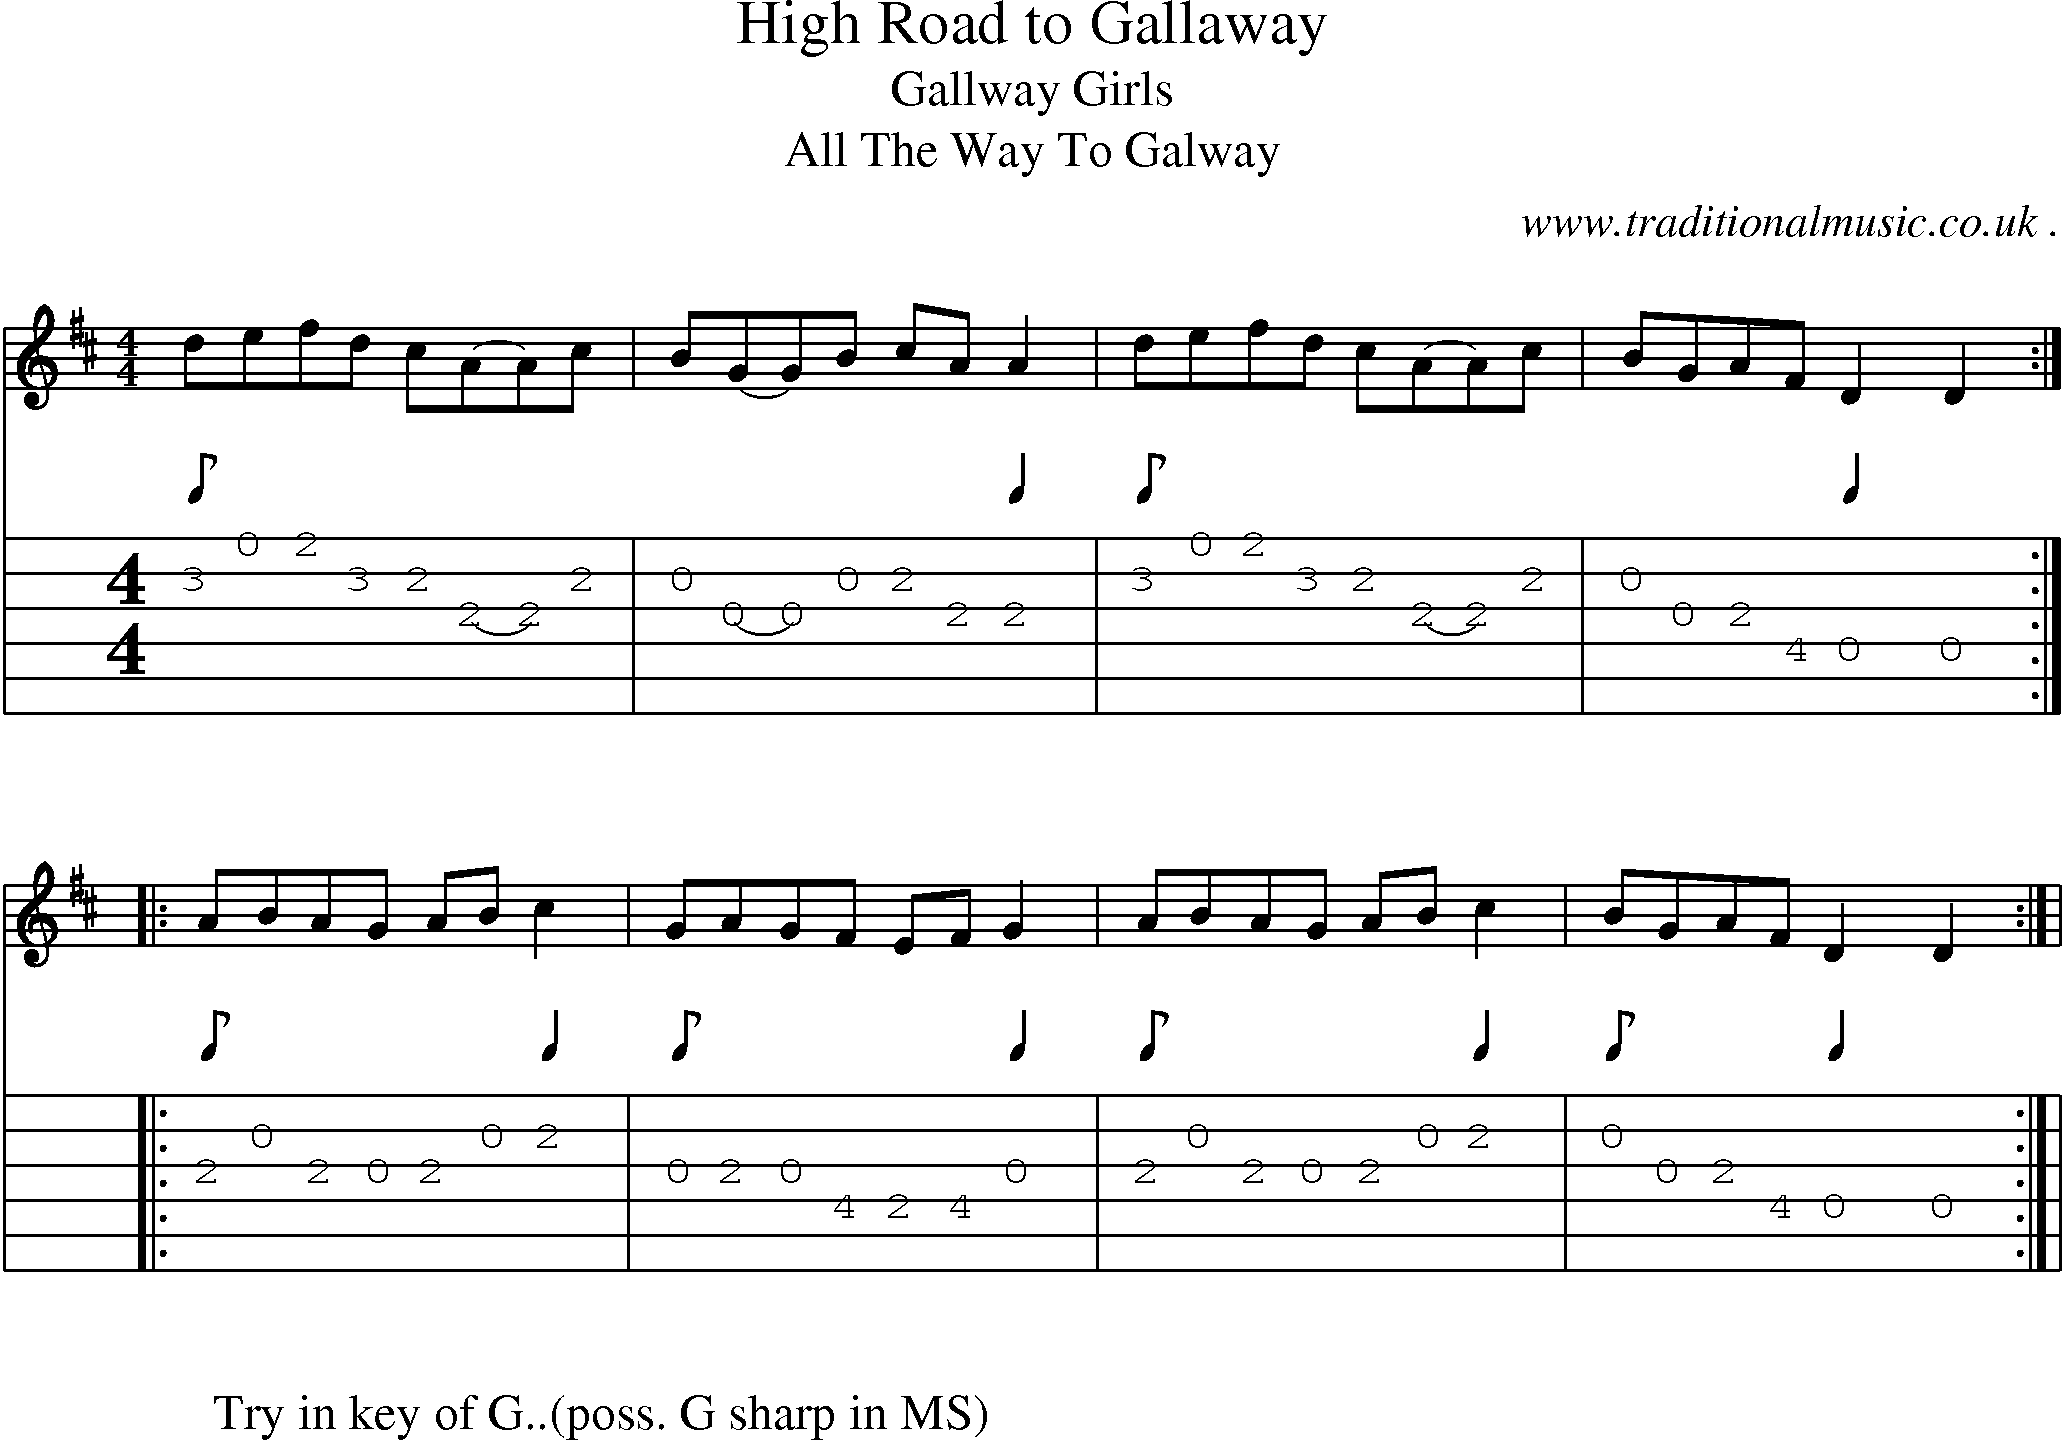 Sheet-Music and Guitar Tabs for High Road To Gallaway